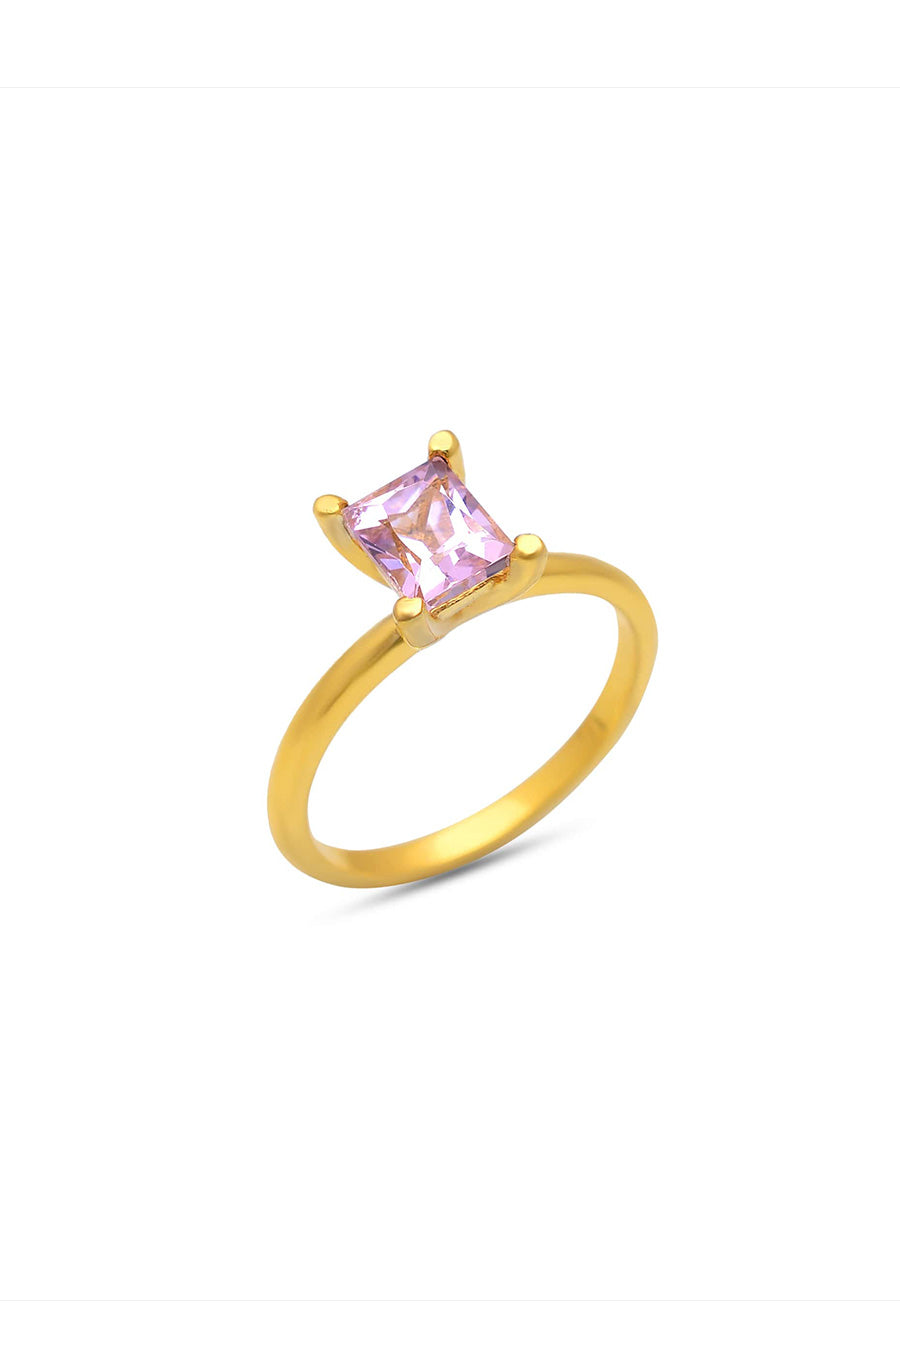 Morganite Octagon Stacking Ring in 925 Silver